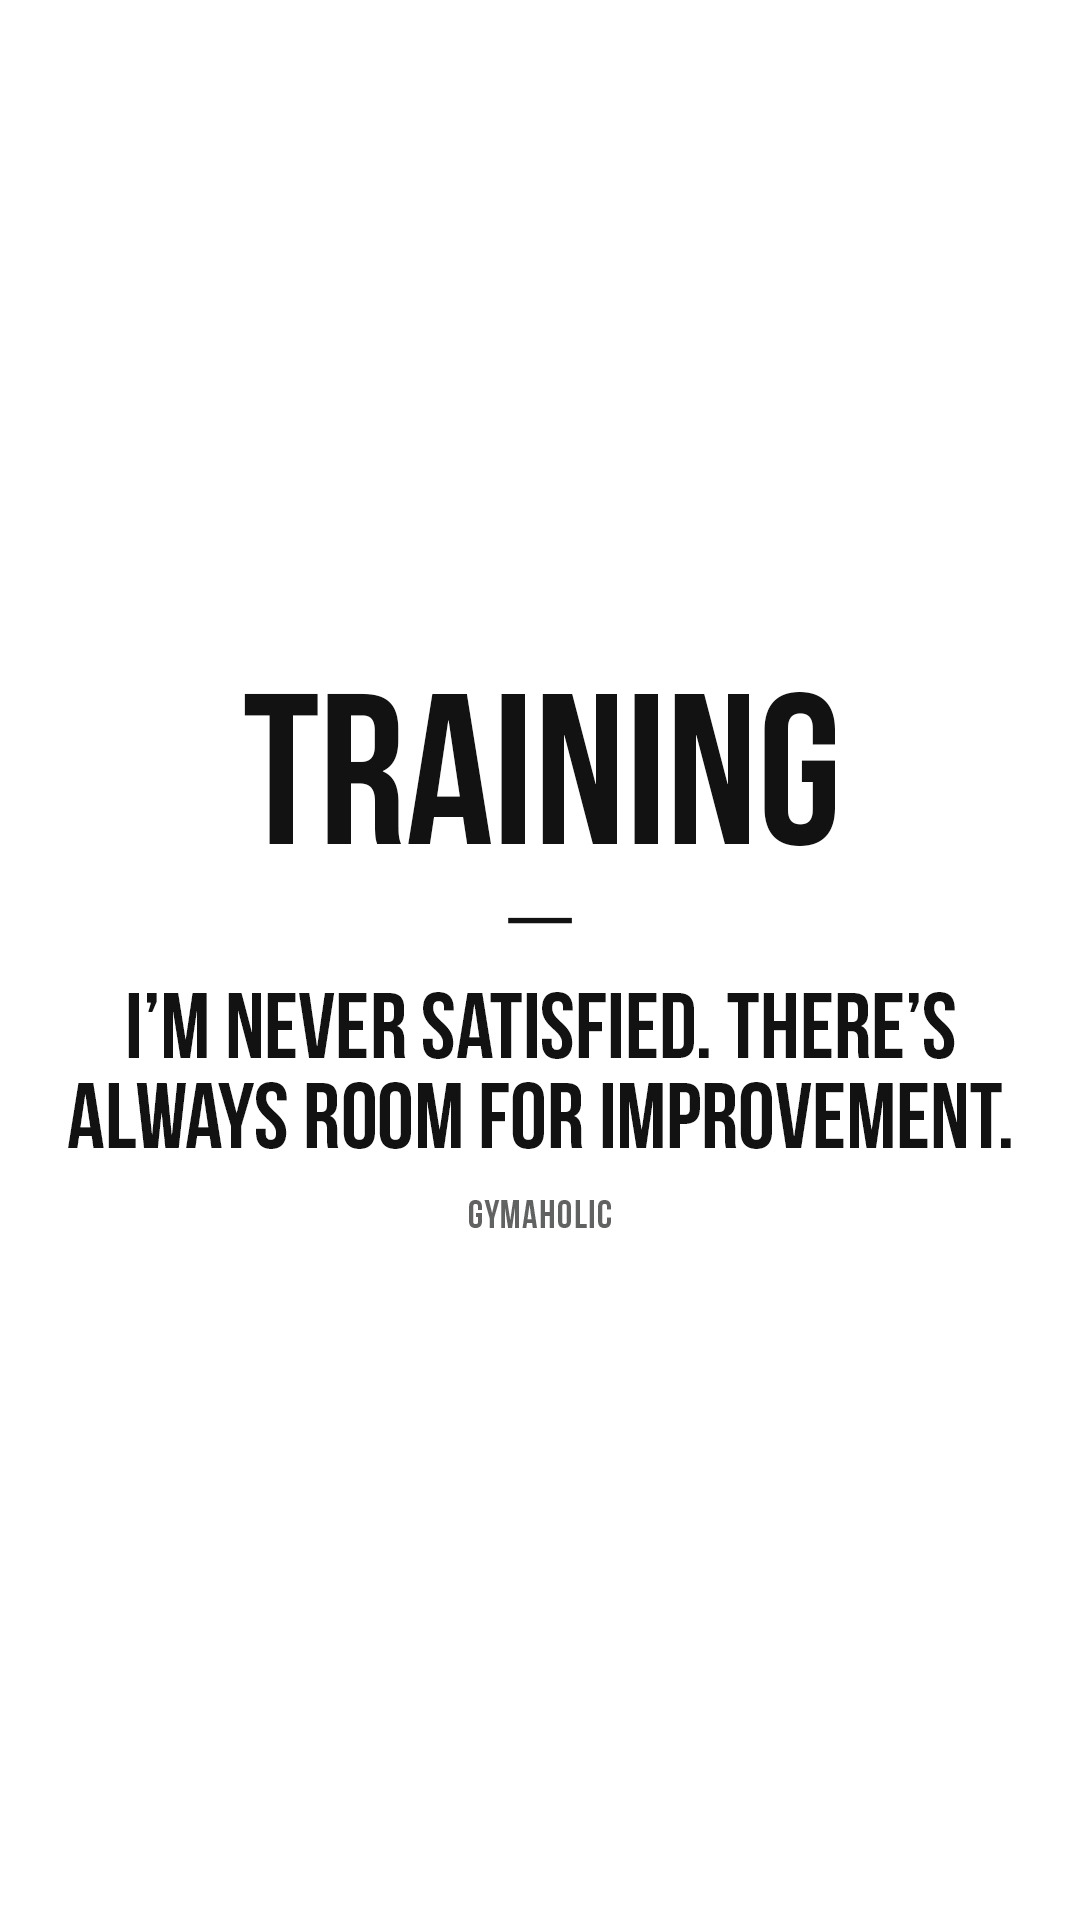 Training: I’m never satisfied